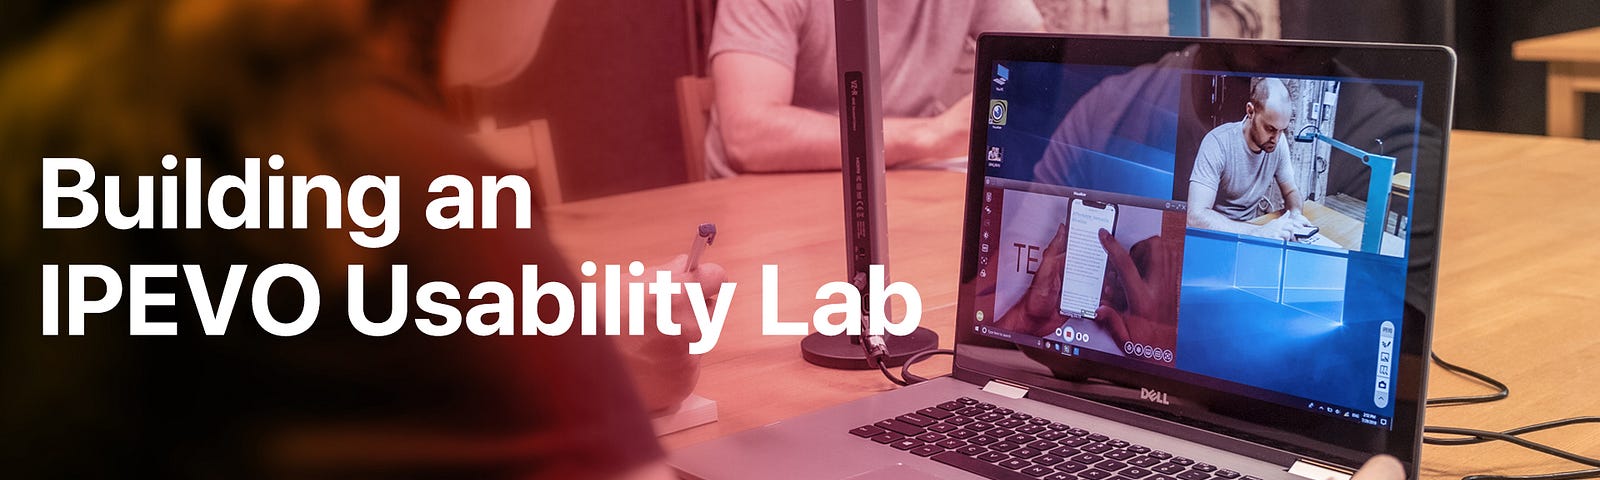 Building an affordable and portable IPEVO usability lab